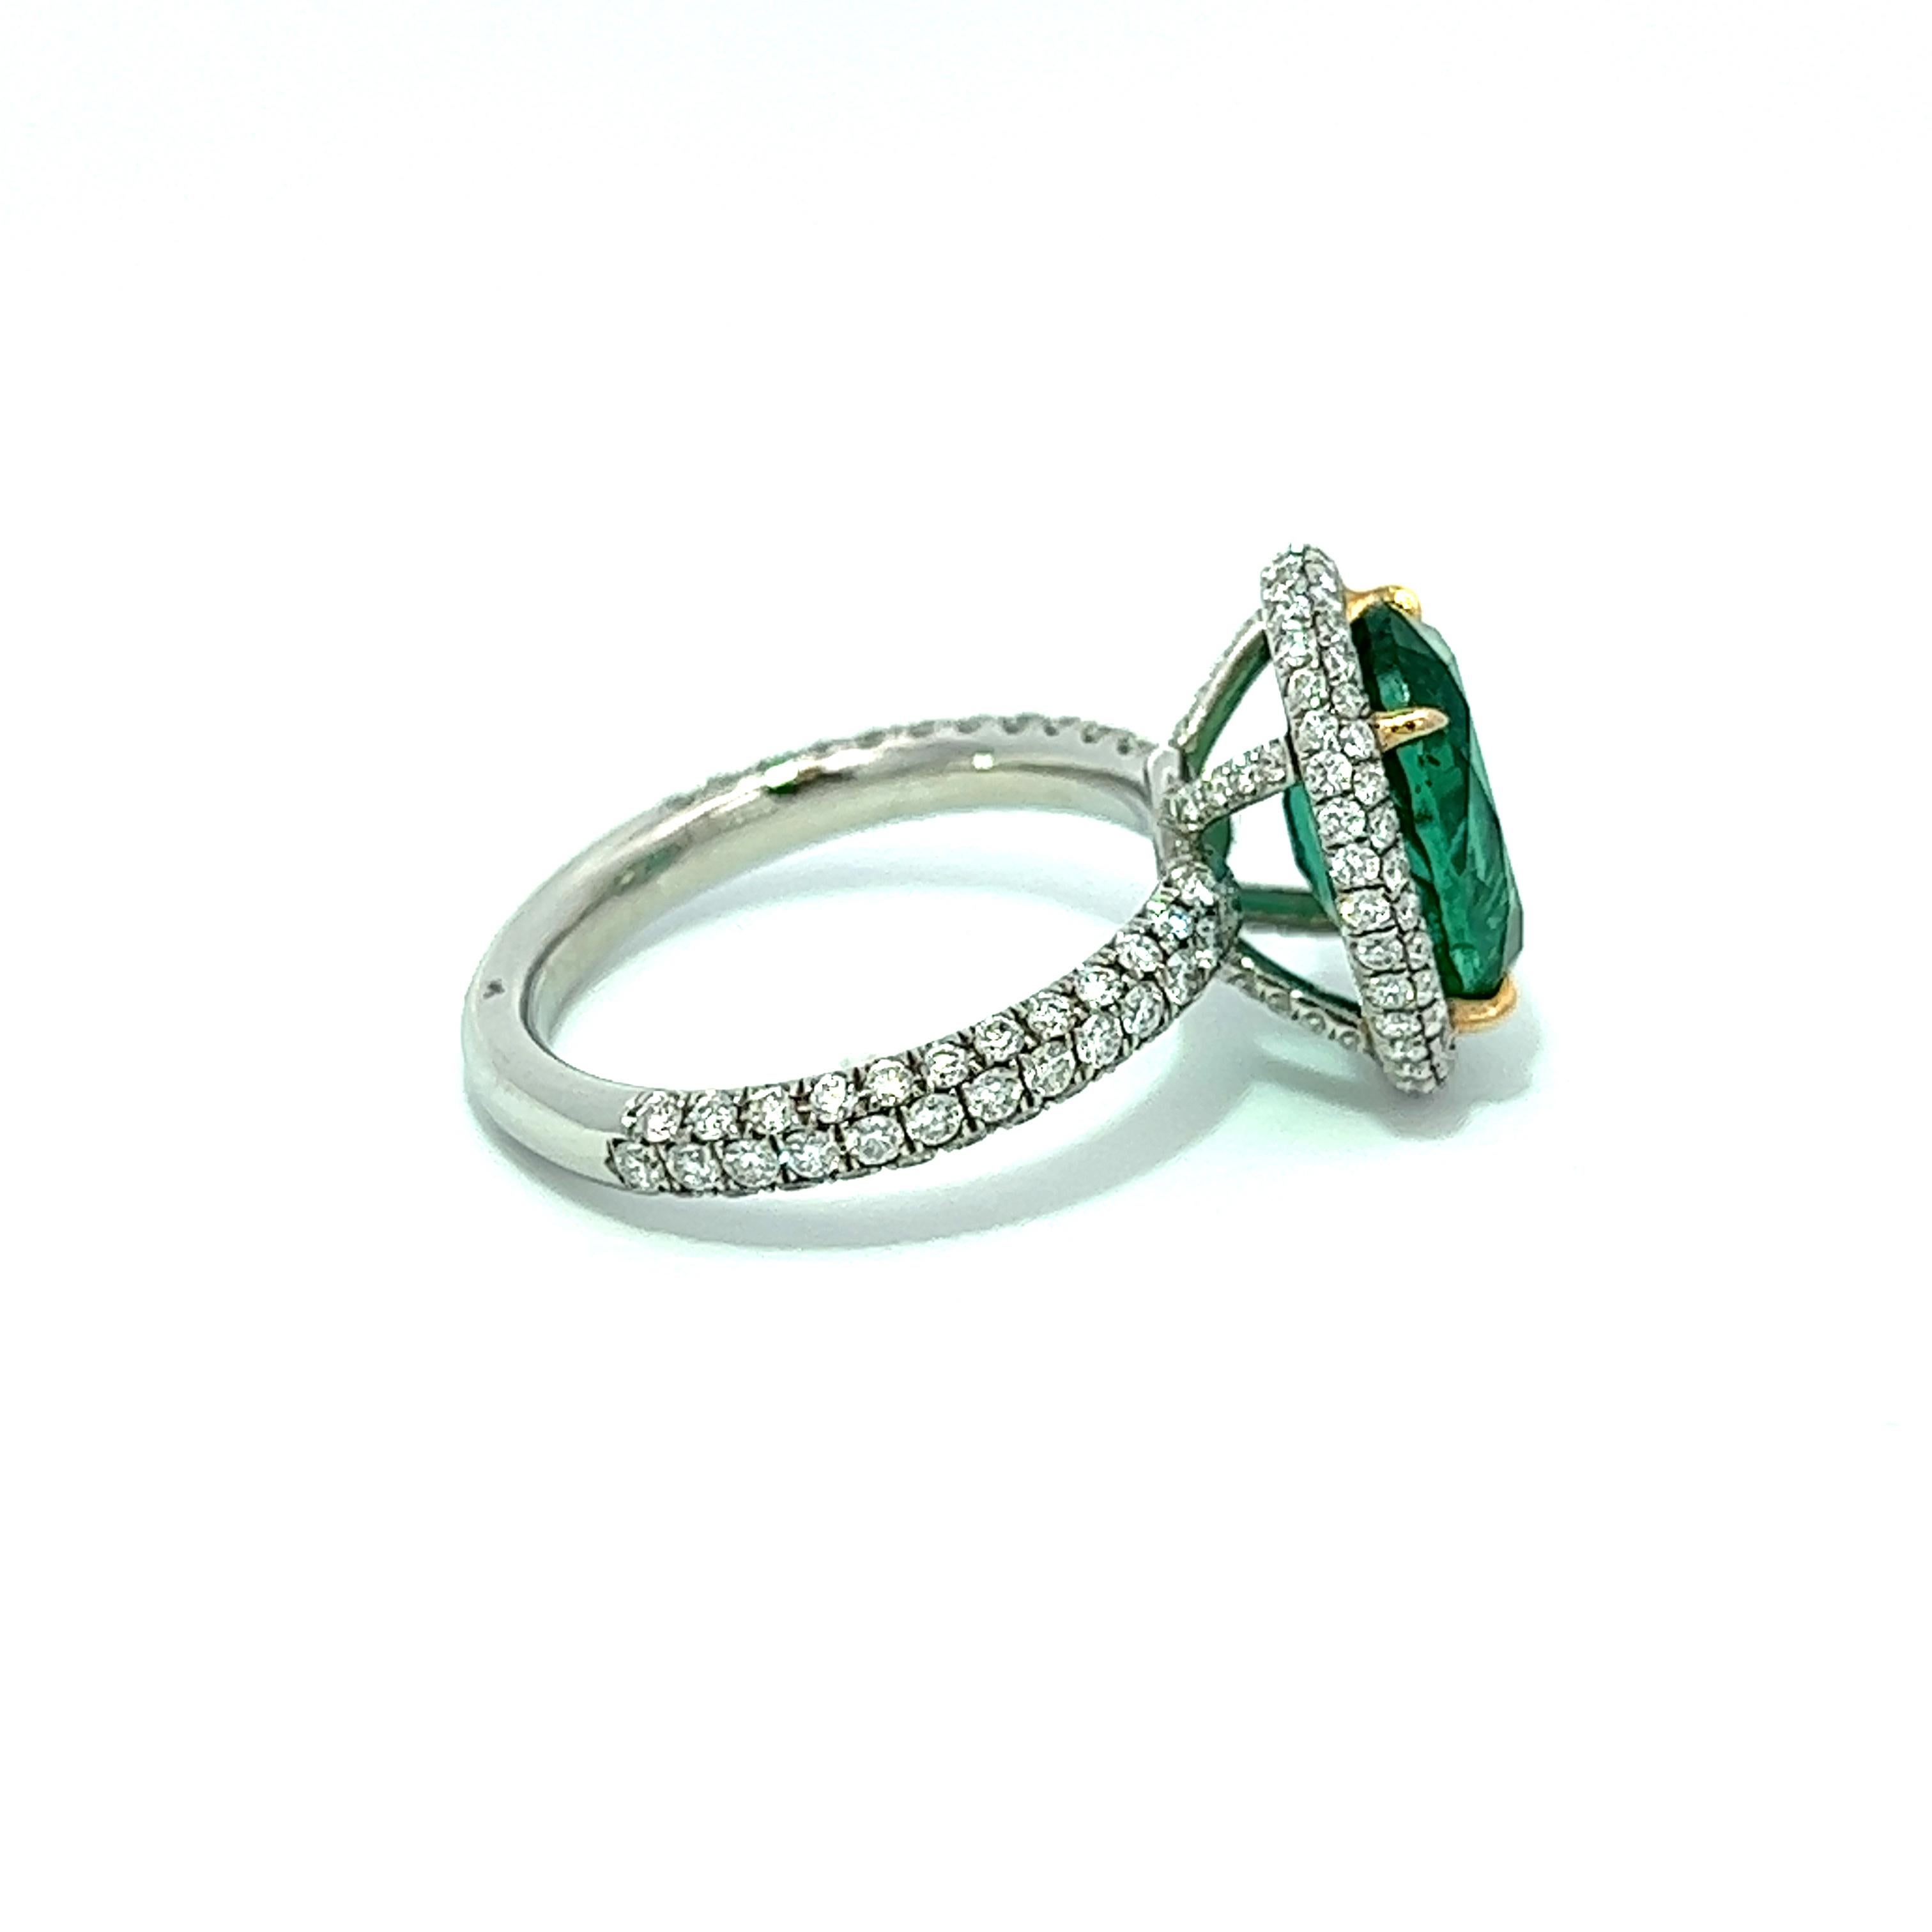 Oval Cut 4.91 Total CT Natura Ovall Colombian Emerald & Diamond Ring PLAT Setting GIA. For Sale